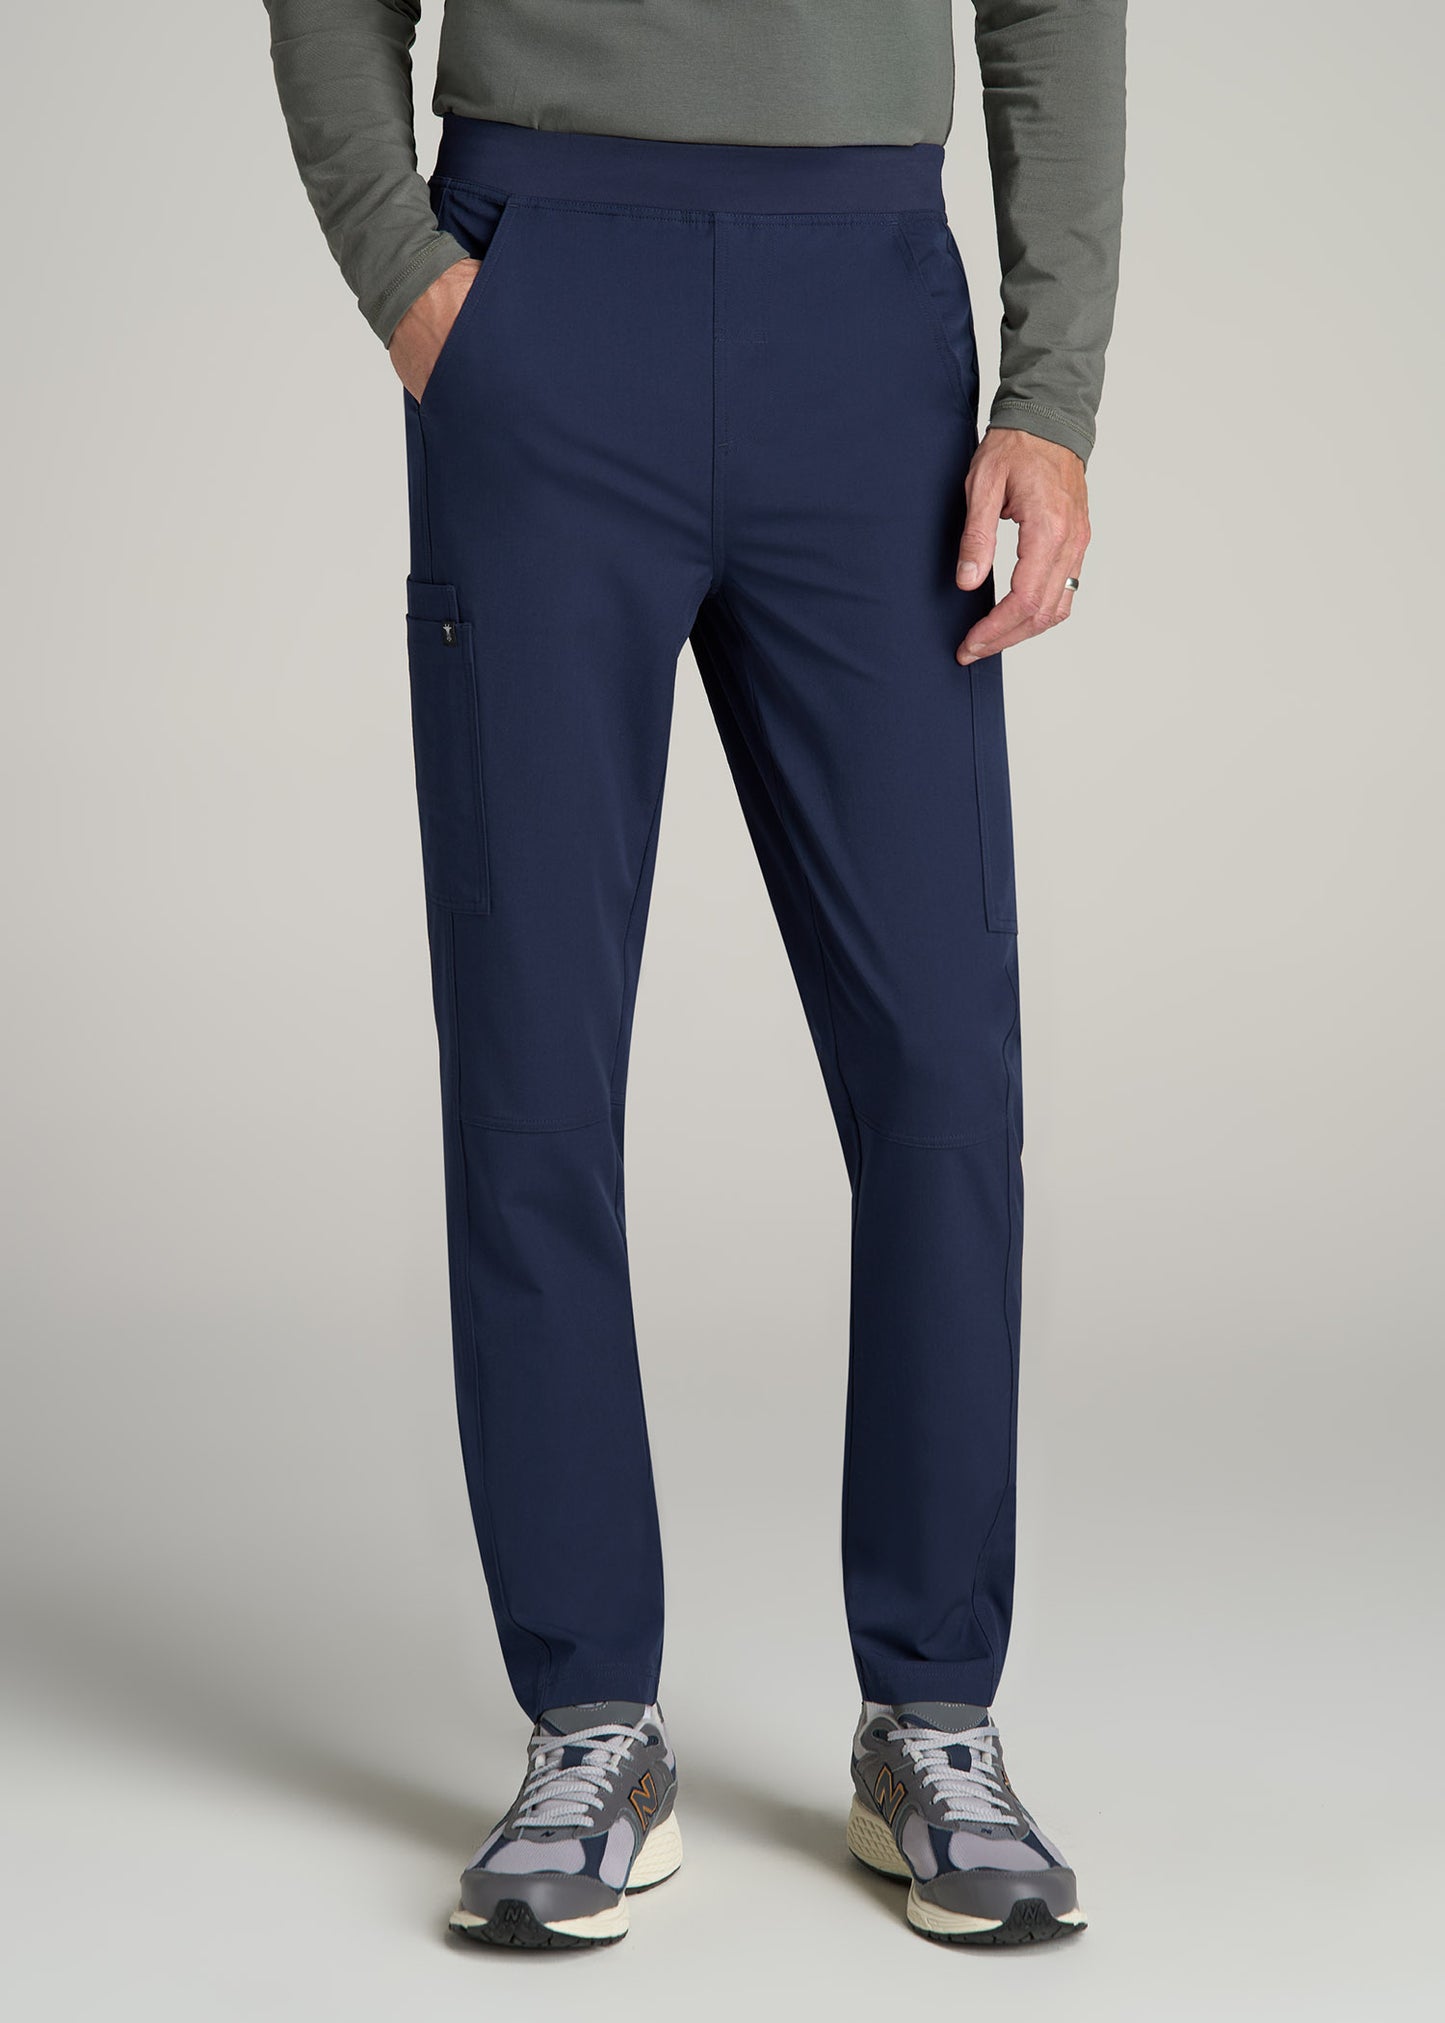 Cargo Scrub Pants for Tall Men in Patriot Blue